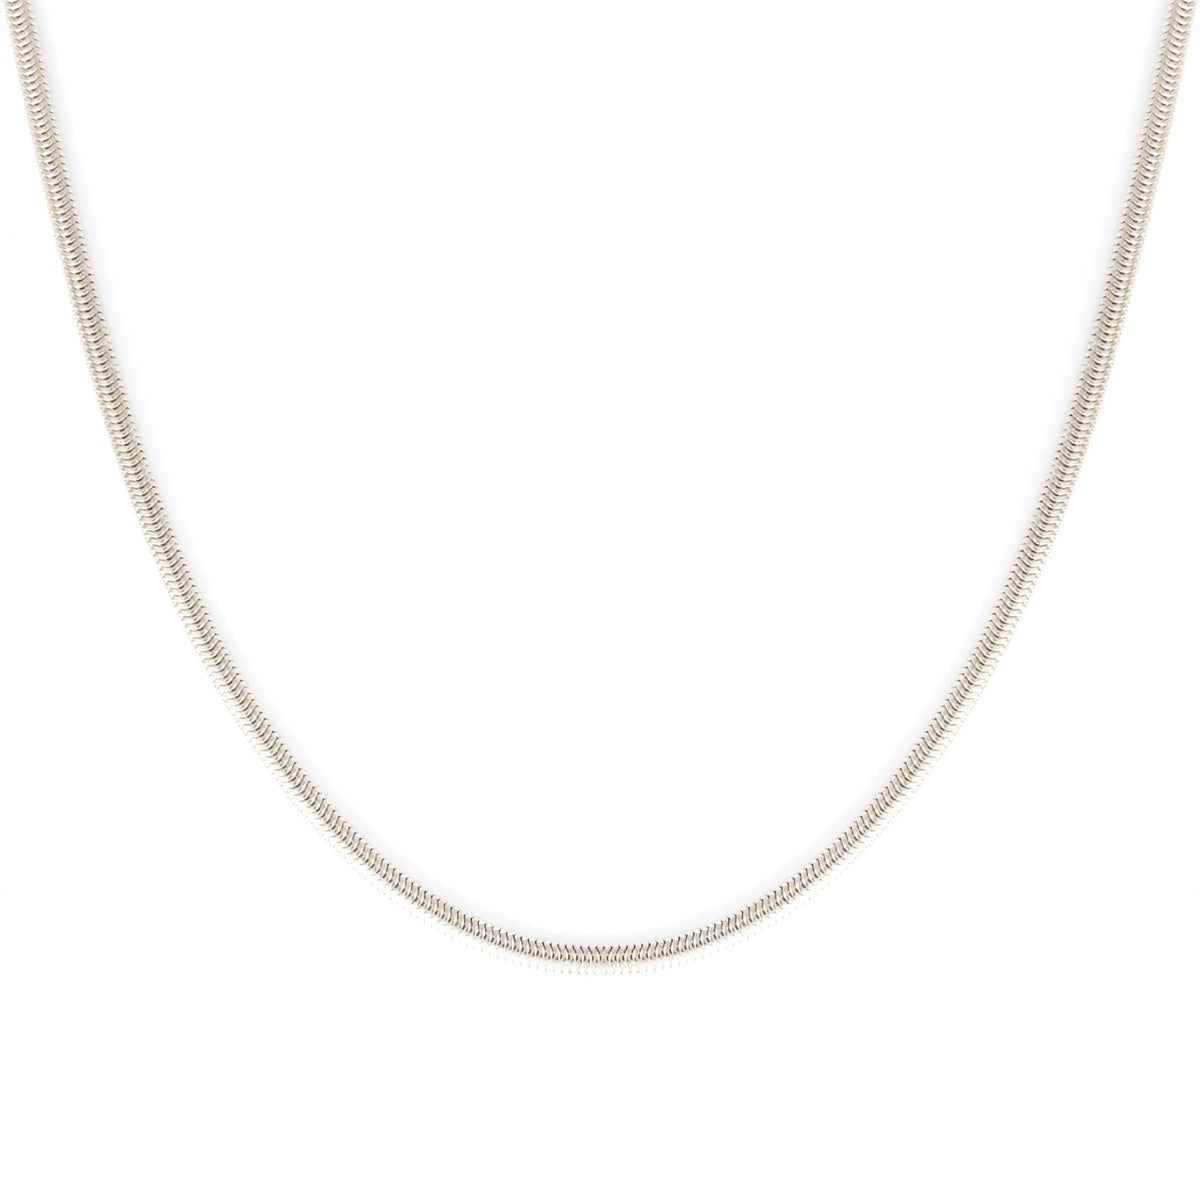 FEARLESS COBRA NECKLACE - SILVER - SO PRETTY CARA COTTER